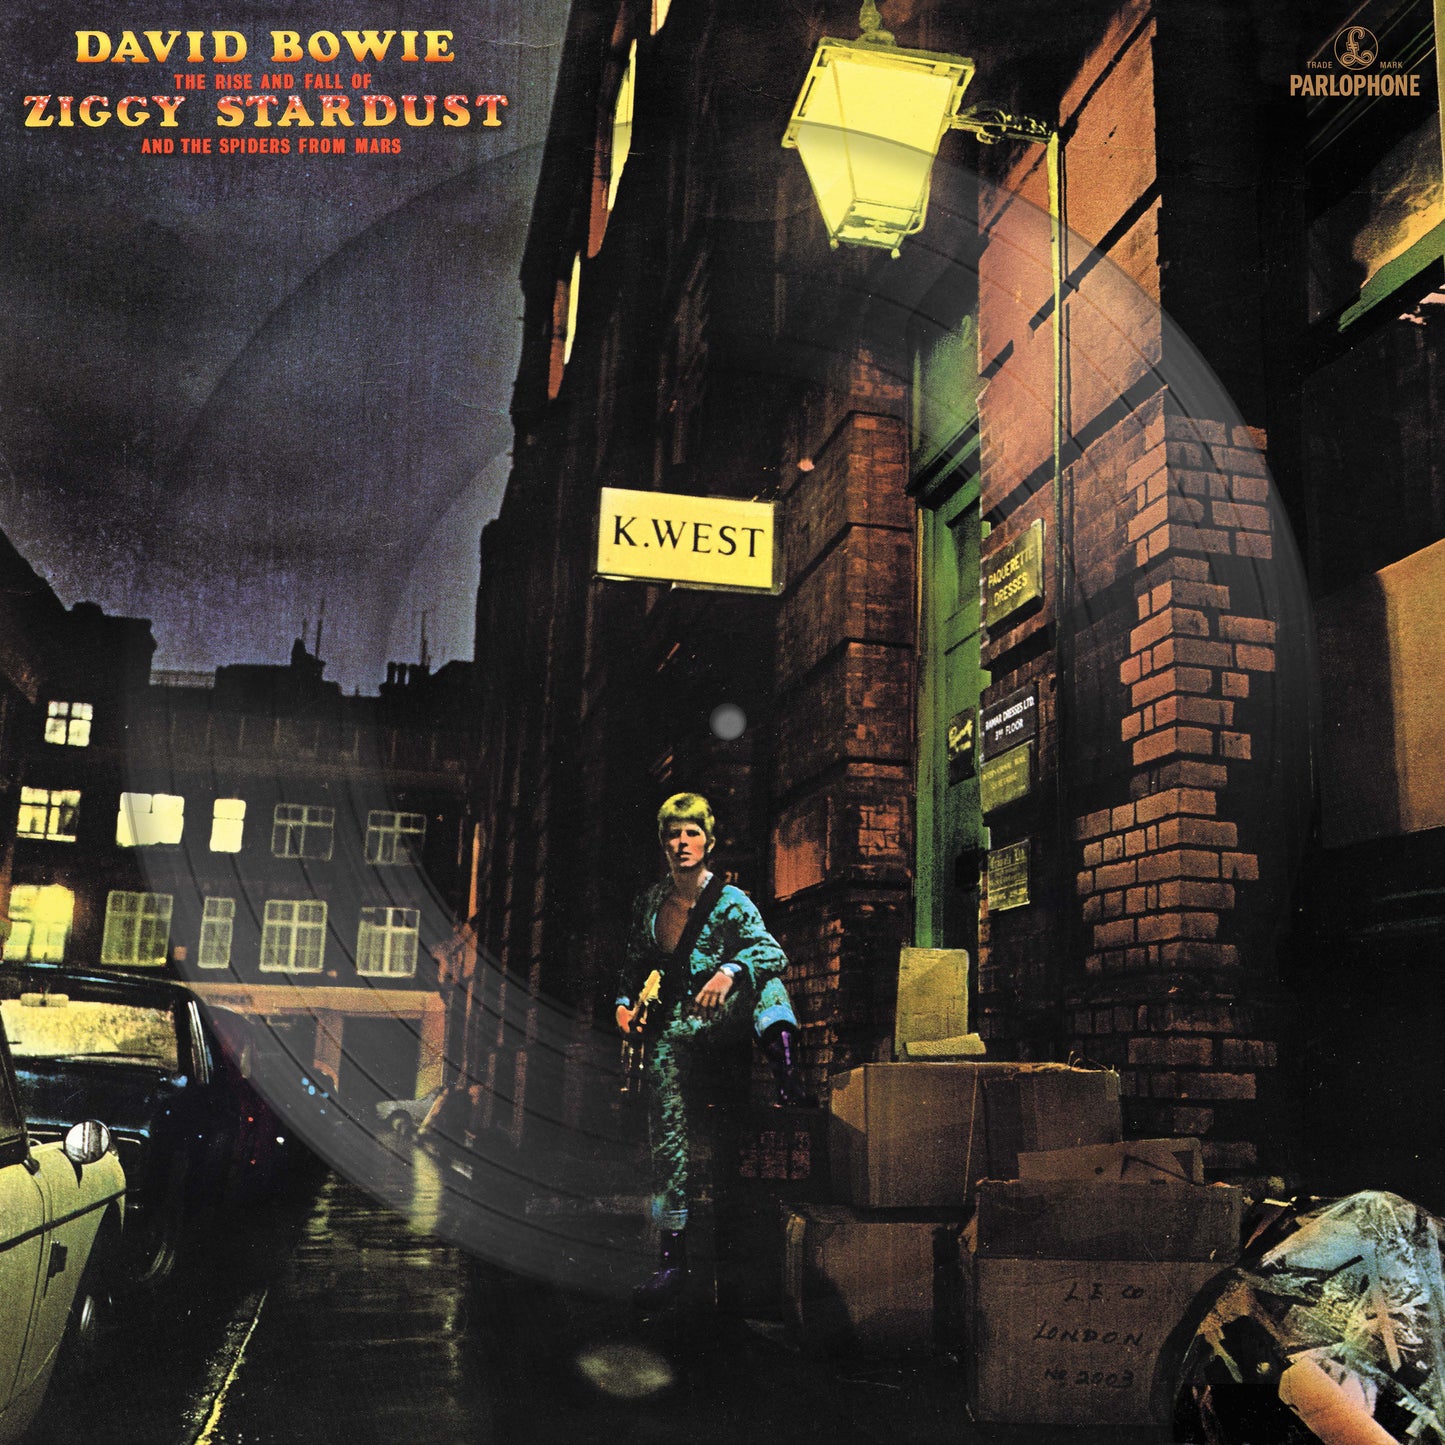 David Bowie ''The Rise And Fall Of Ziggy Stardust And The Spiders From Mars'' LP  (Picture Disc)